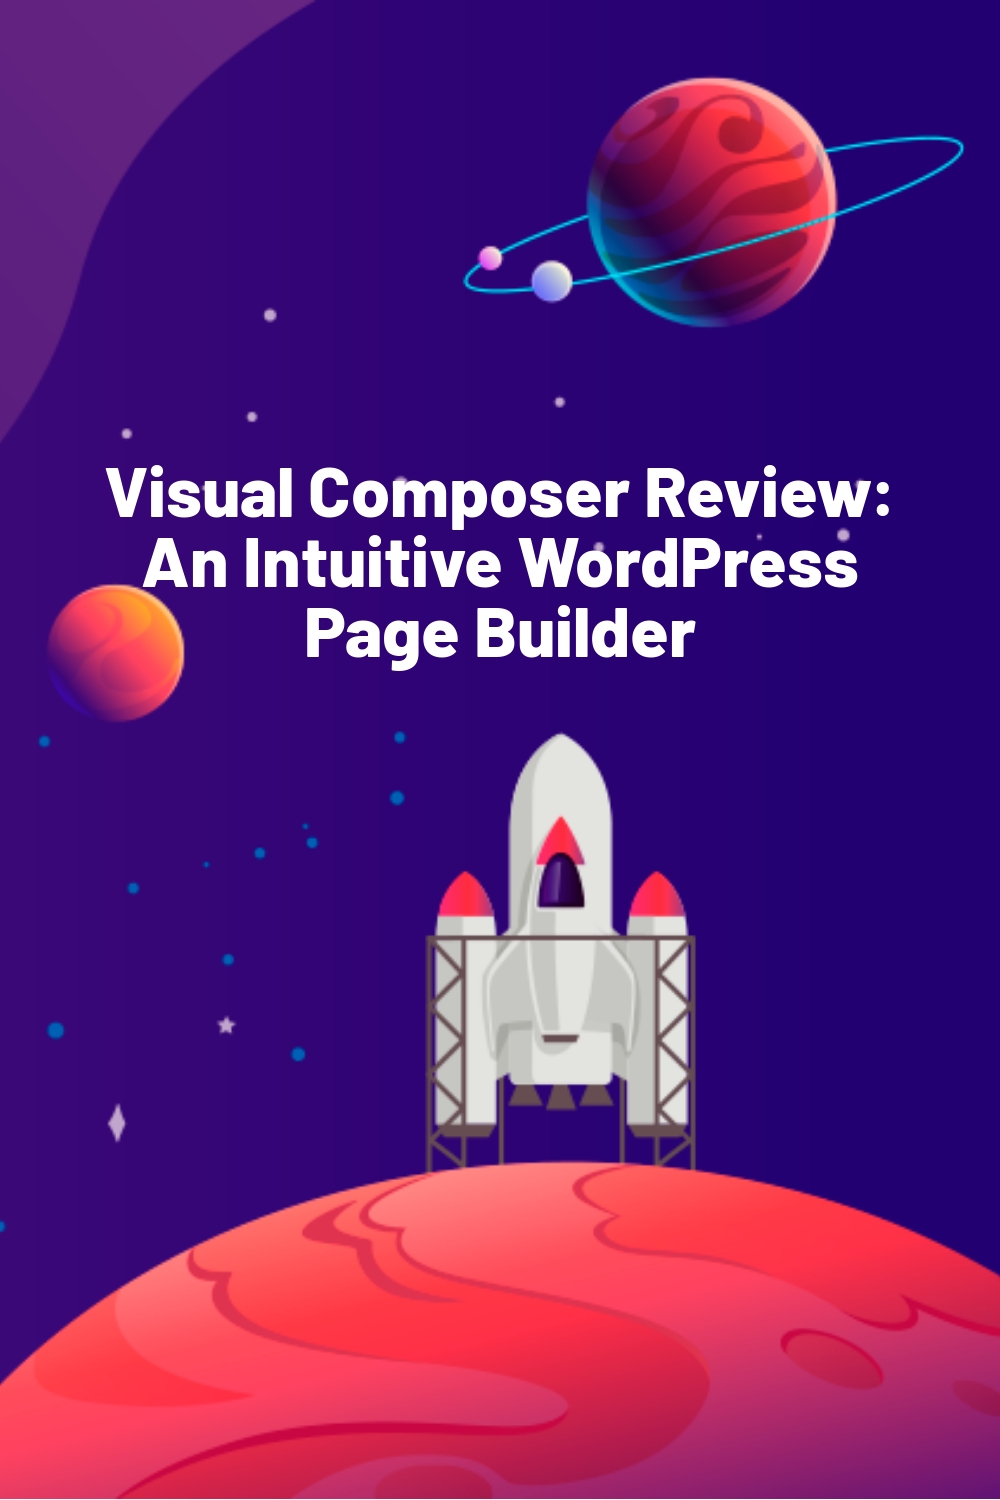 Visual Composer Review: An Intuitive WordPress Page Builder